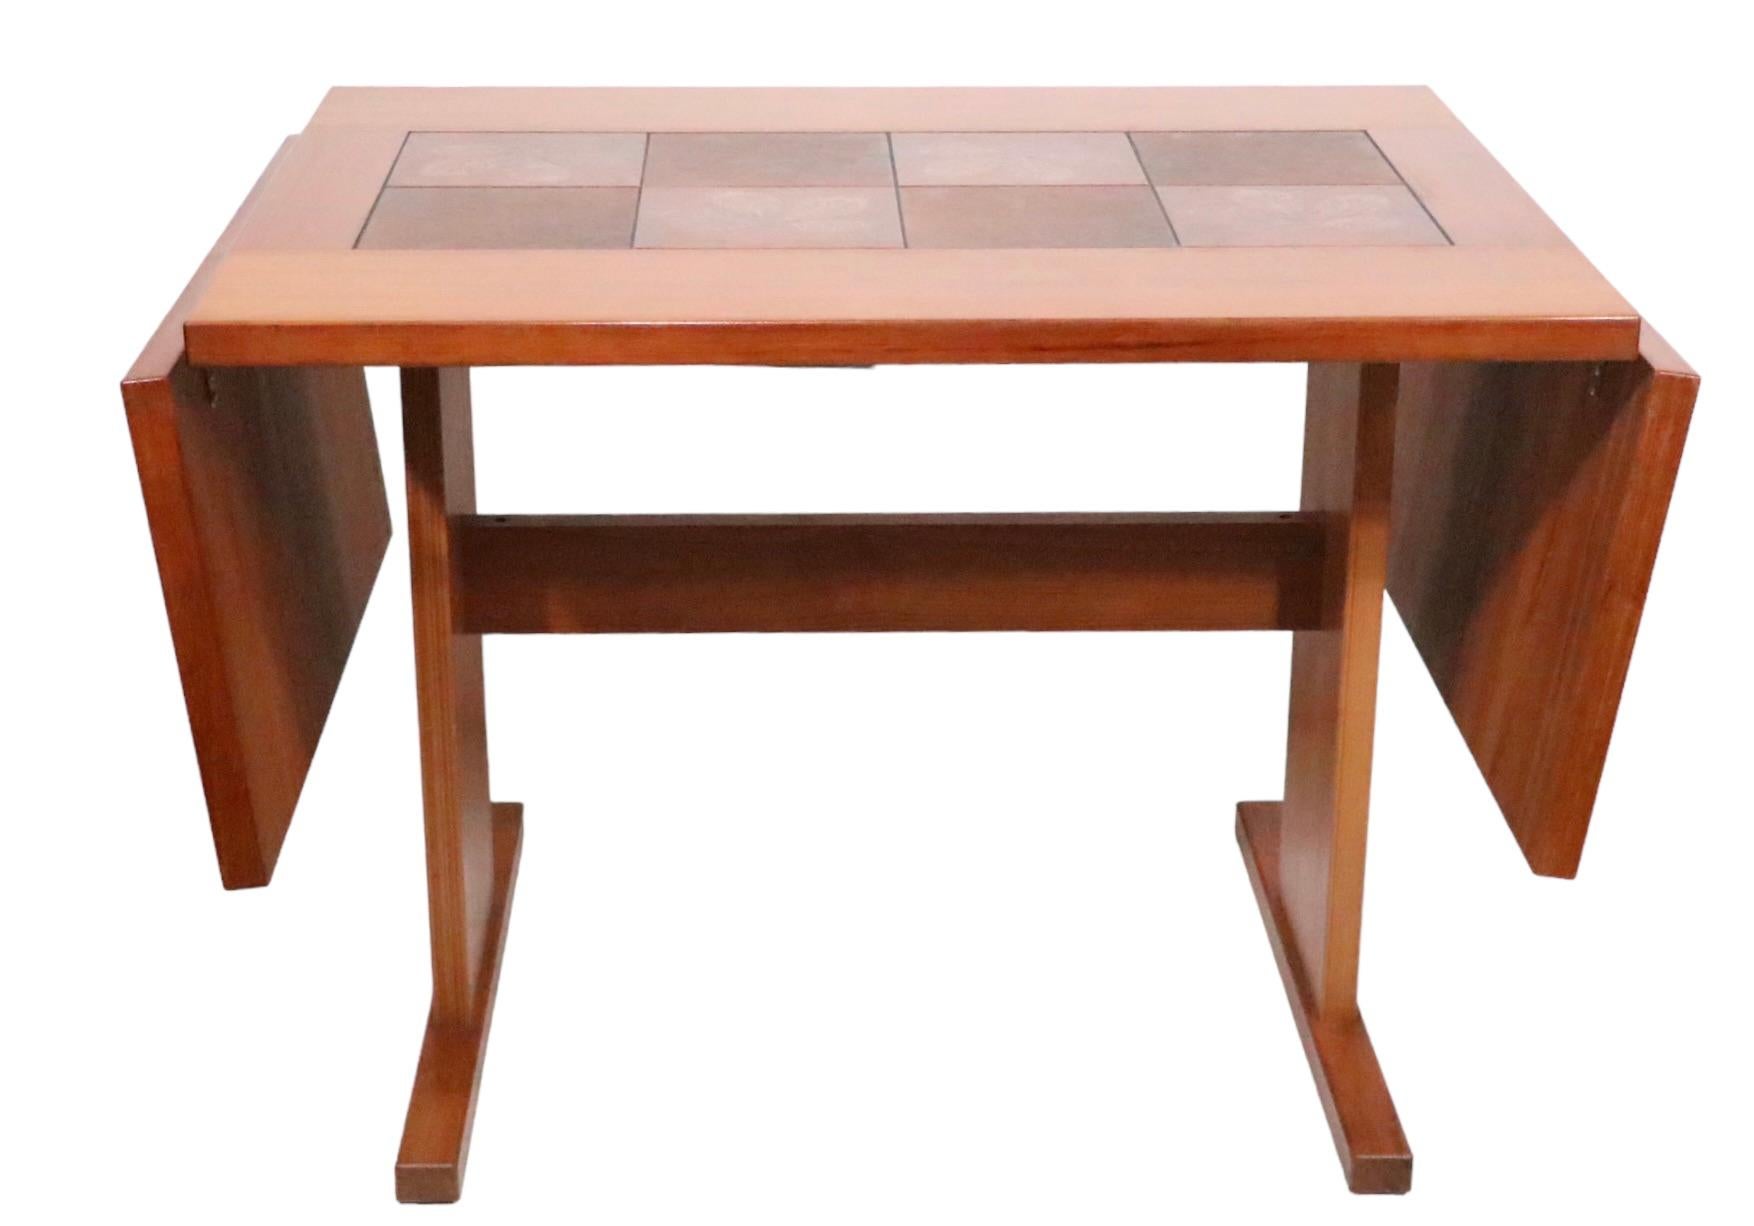 Late 20th Century Mid Century Danish Modern Tile Top Drop Leaf Table by Gangso Mobler circa 1970s